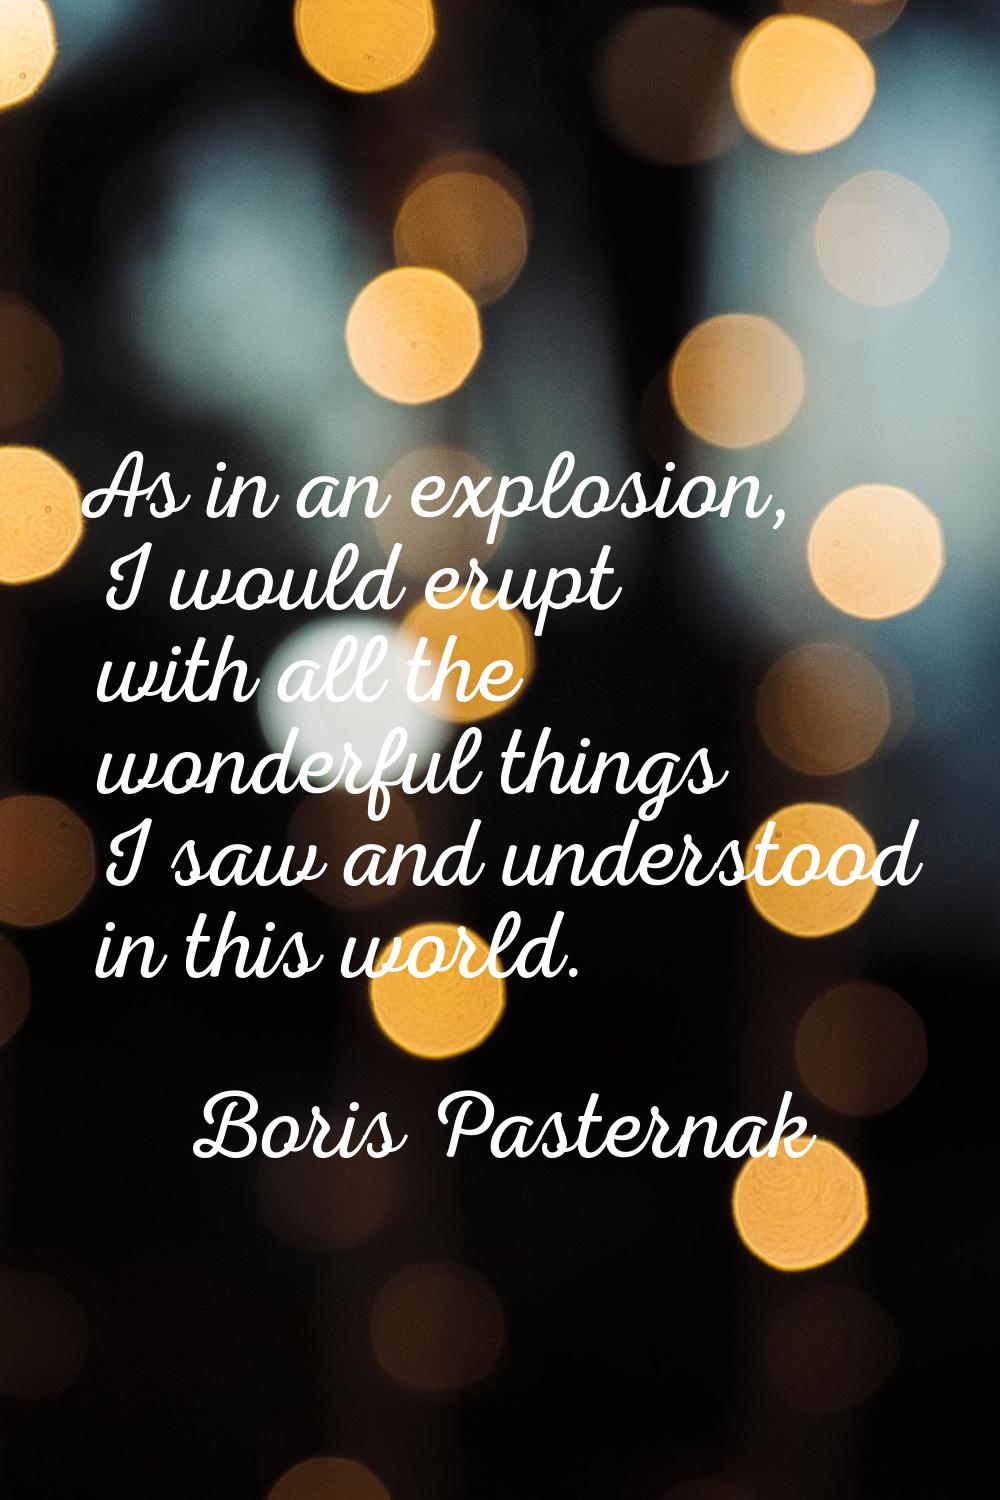 As in an explosion, I would erupt with all the wonderful things I saw and understood in this world.